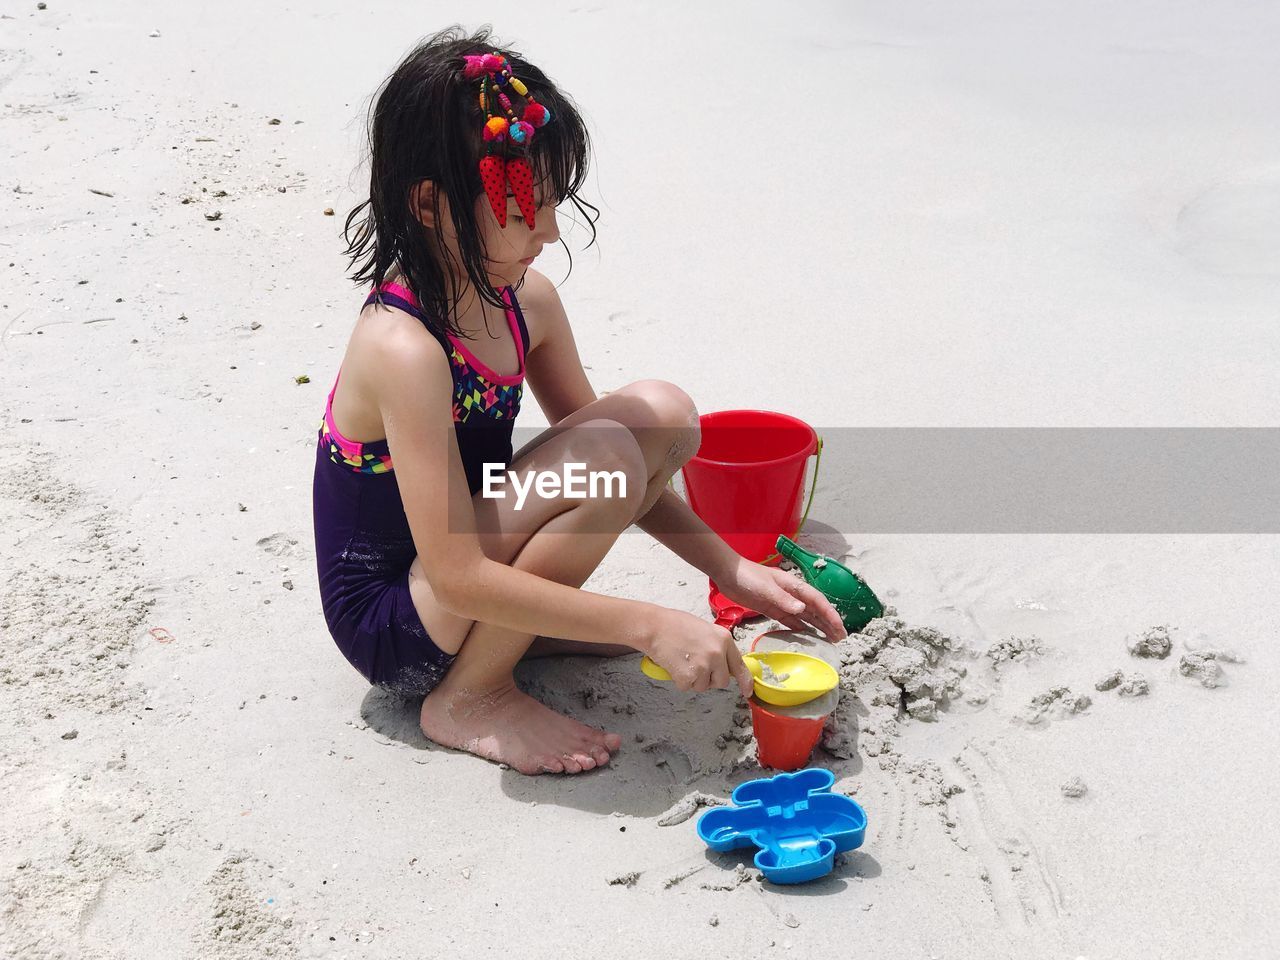 Girl playing with toys while crouching on sand at beach